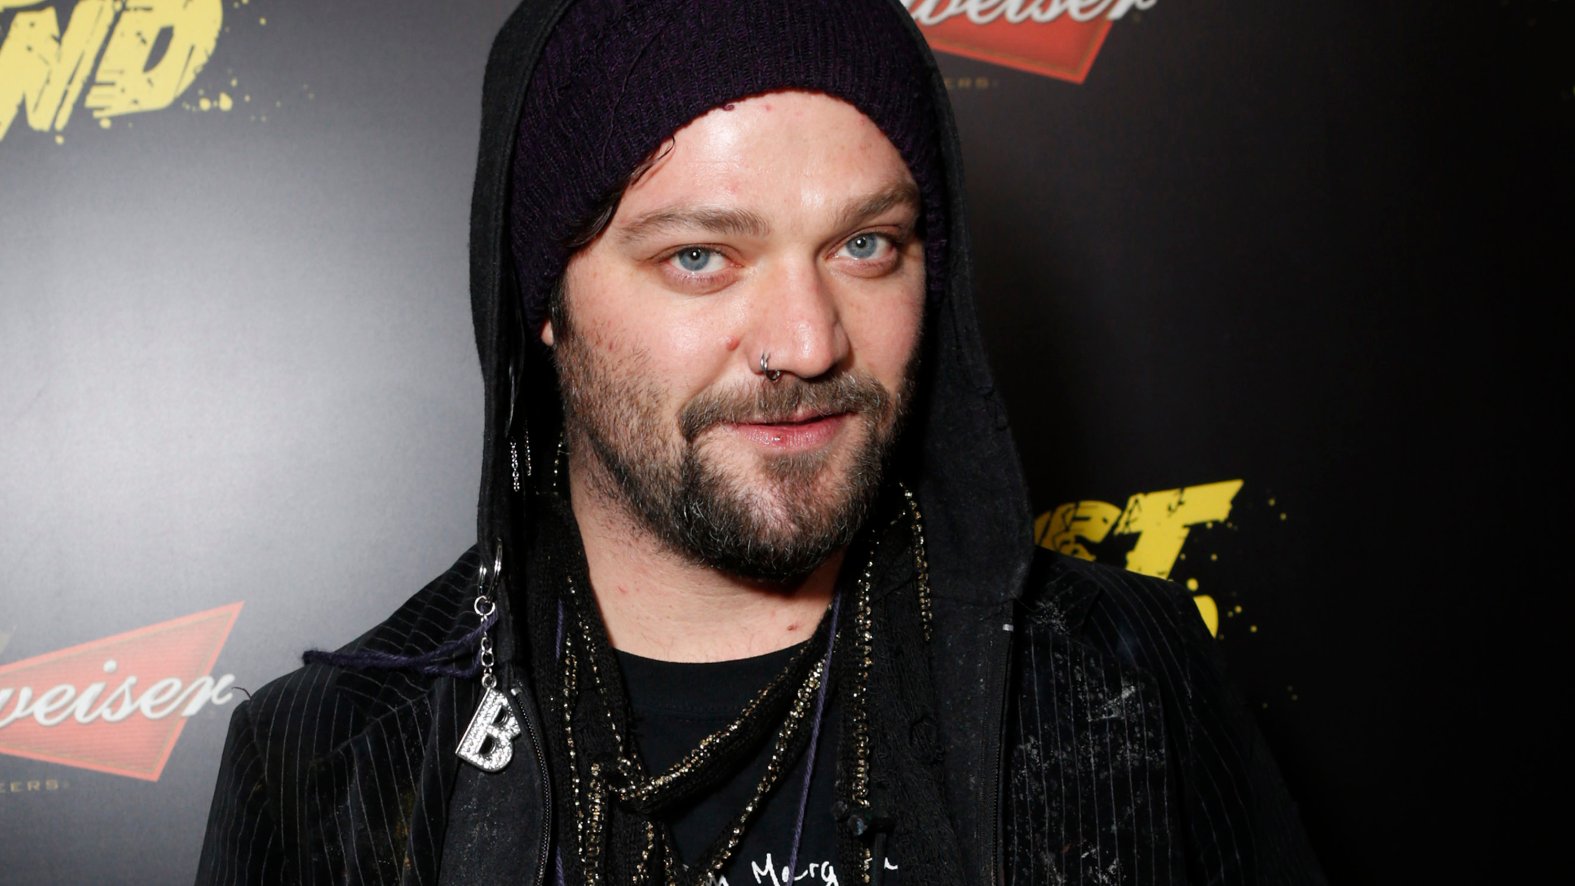 Bam Margera, Fired From Latest ‘Jackass’ Film, Sues to